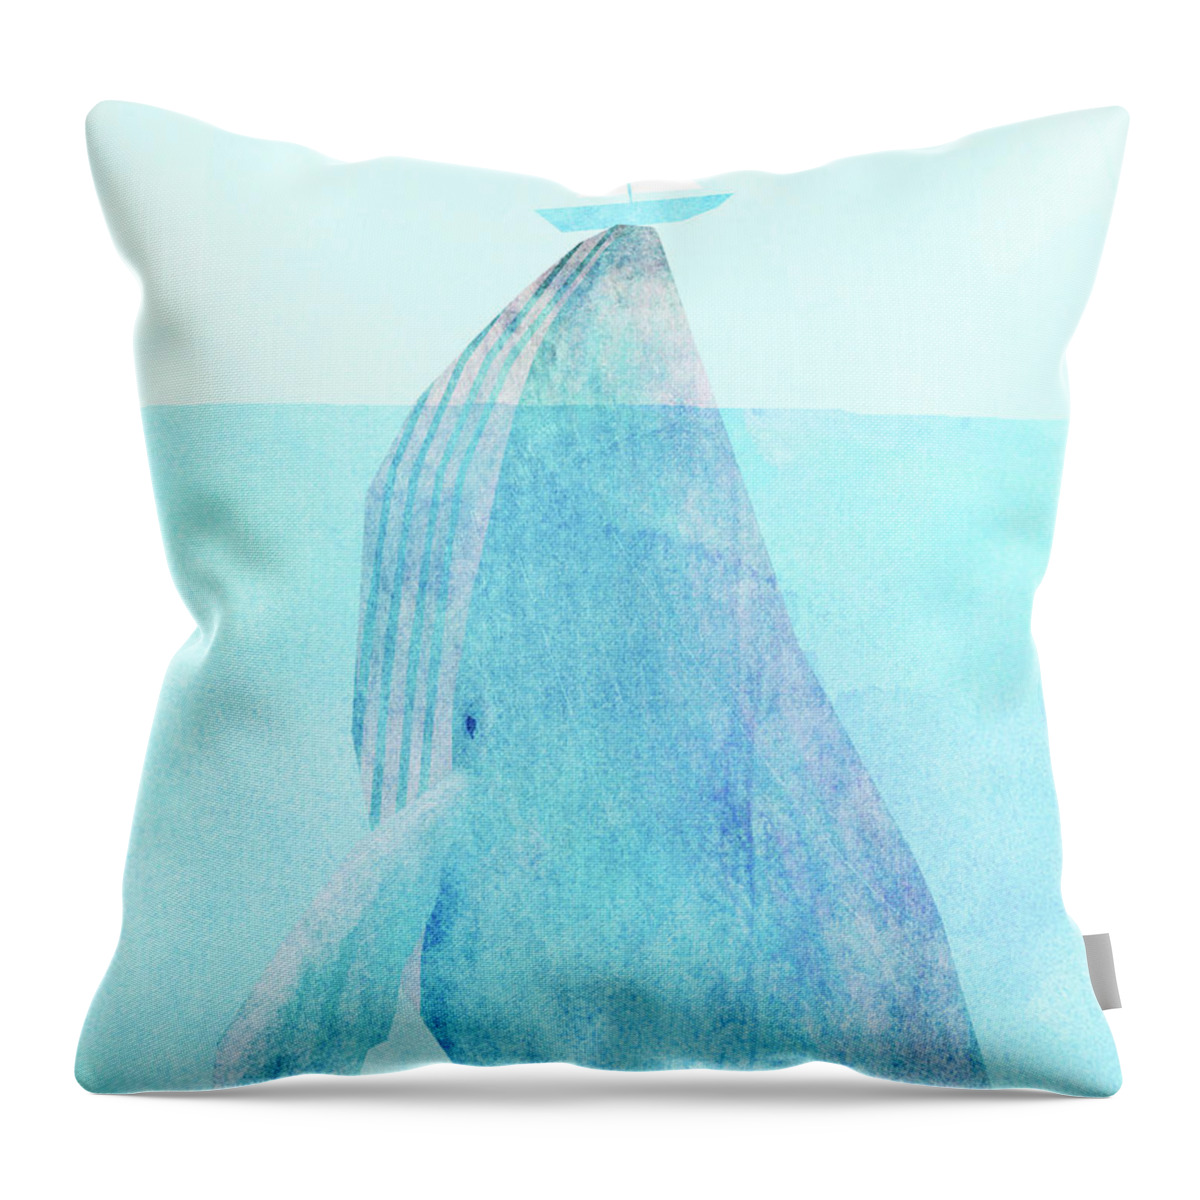 Whale Throw Pillow featuring the drawing Lift option by Eric Fan